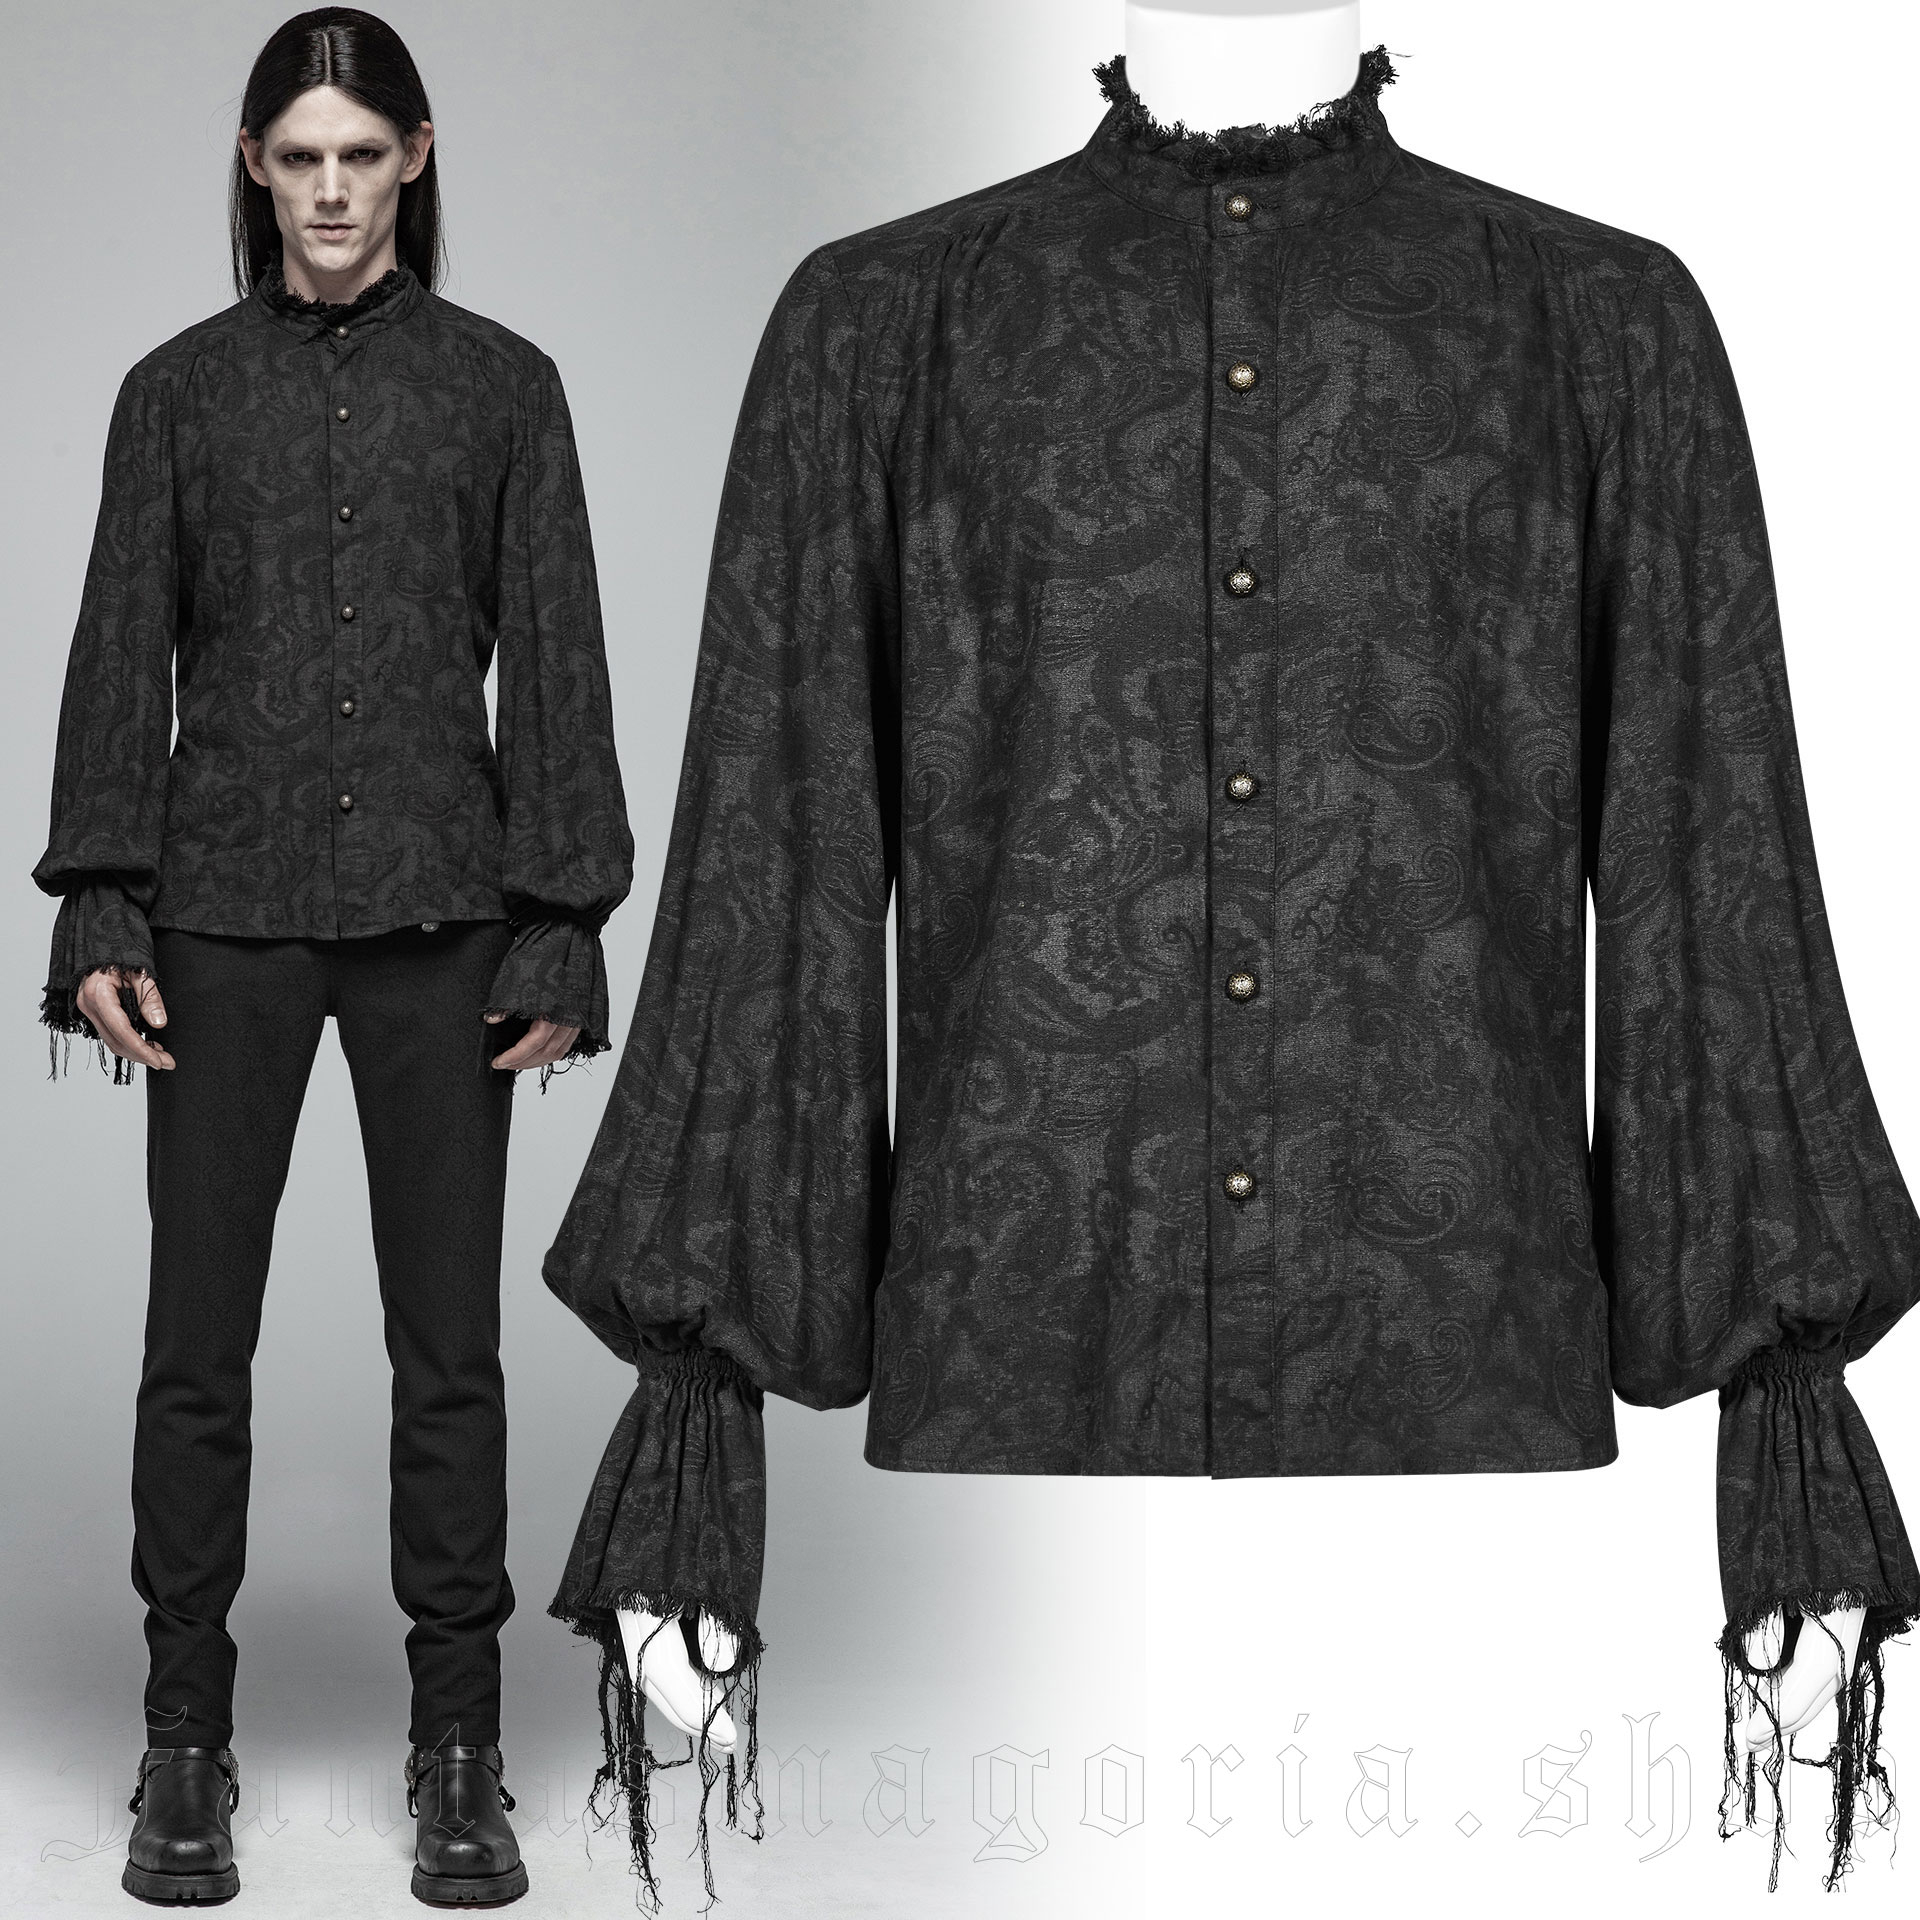 Long-sleeved shirt with standing collar by Punk Rave.. Punk